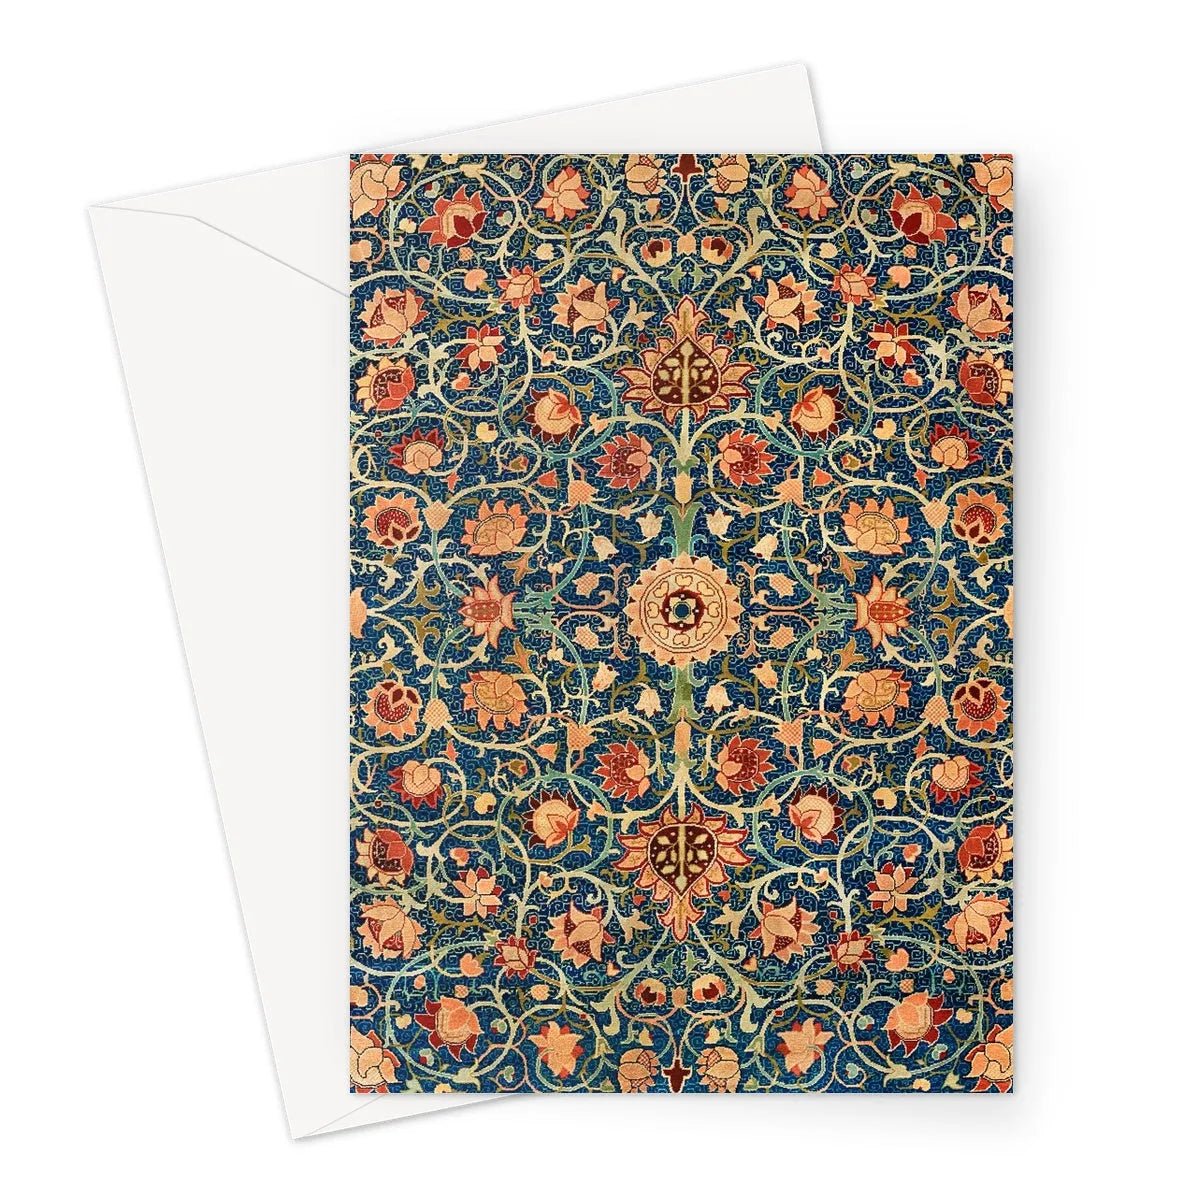 Holland Park Carpet By William Morris Greeting Card - A5 Portrait / 1 Card - Greeting & Note Cards - Aesthetic Art